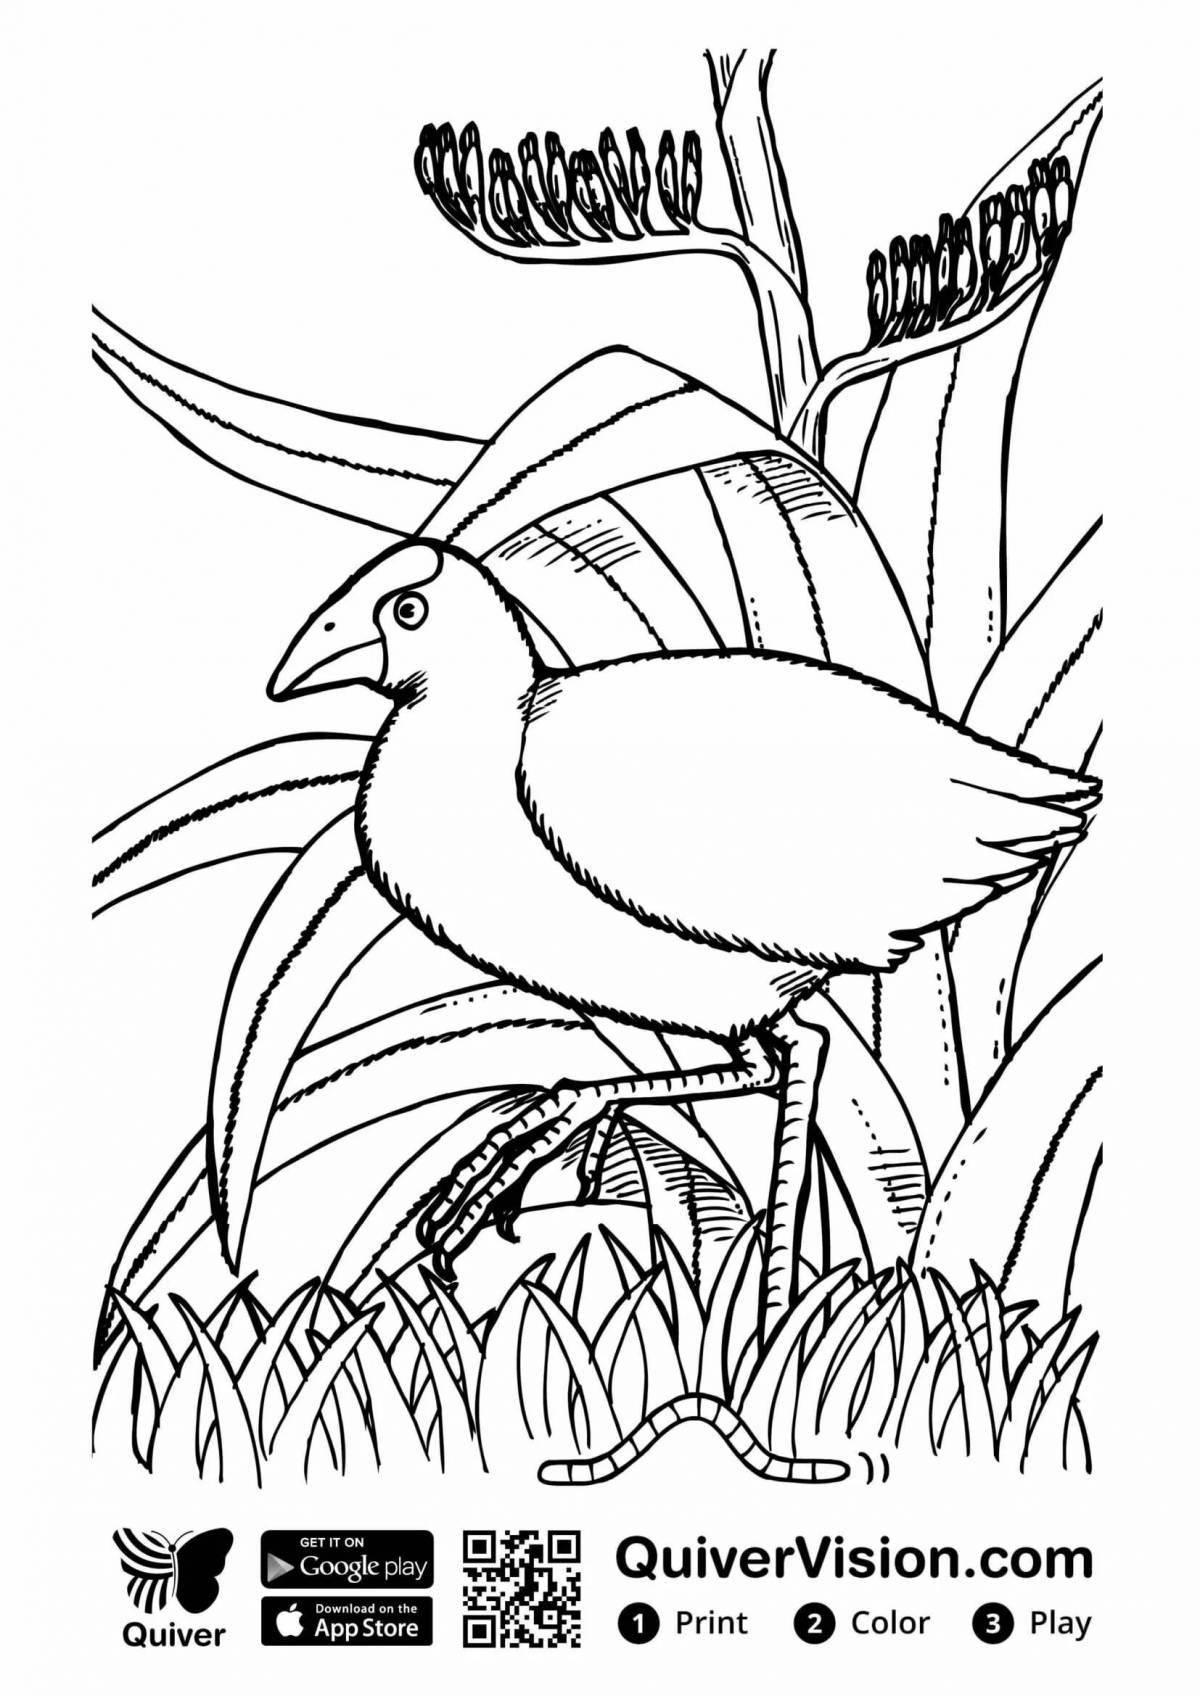 Coloring page exciting quiver